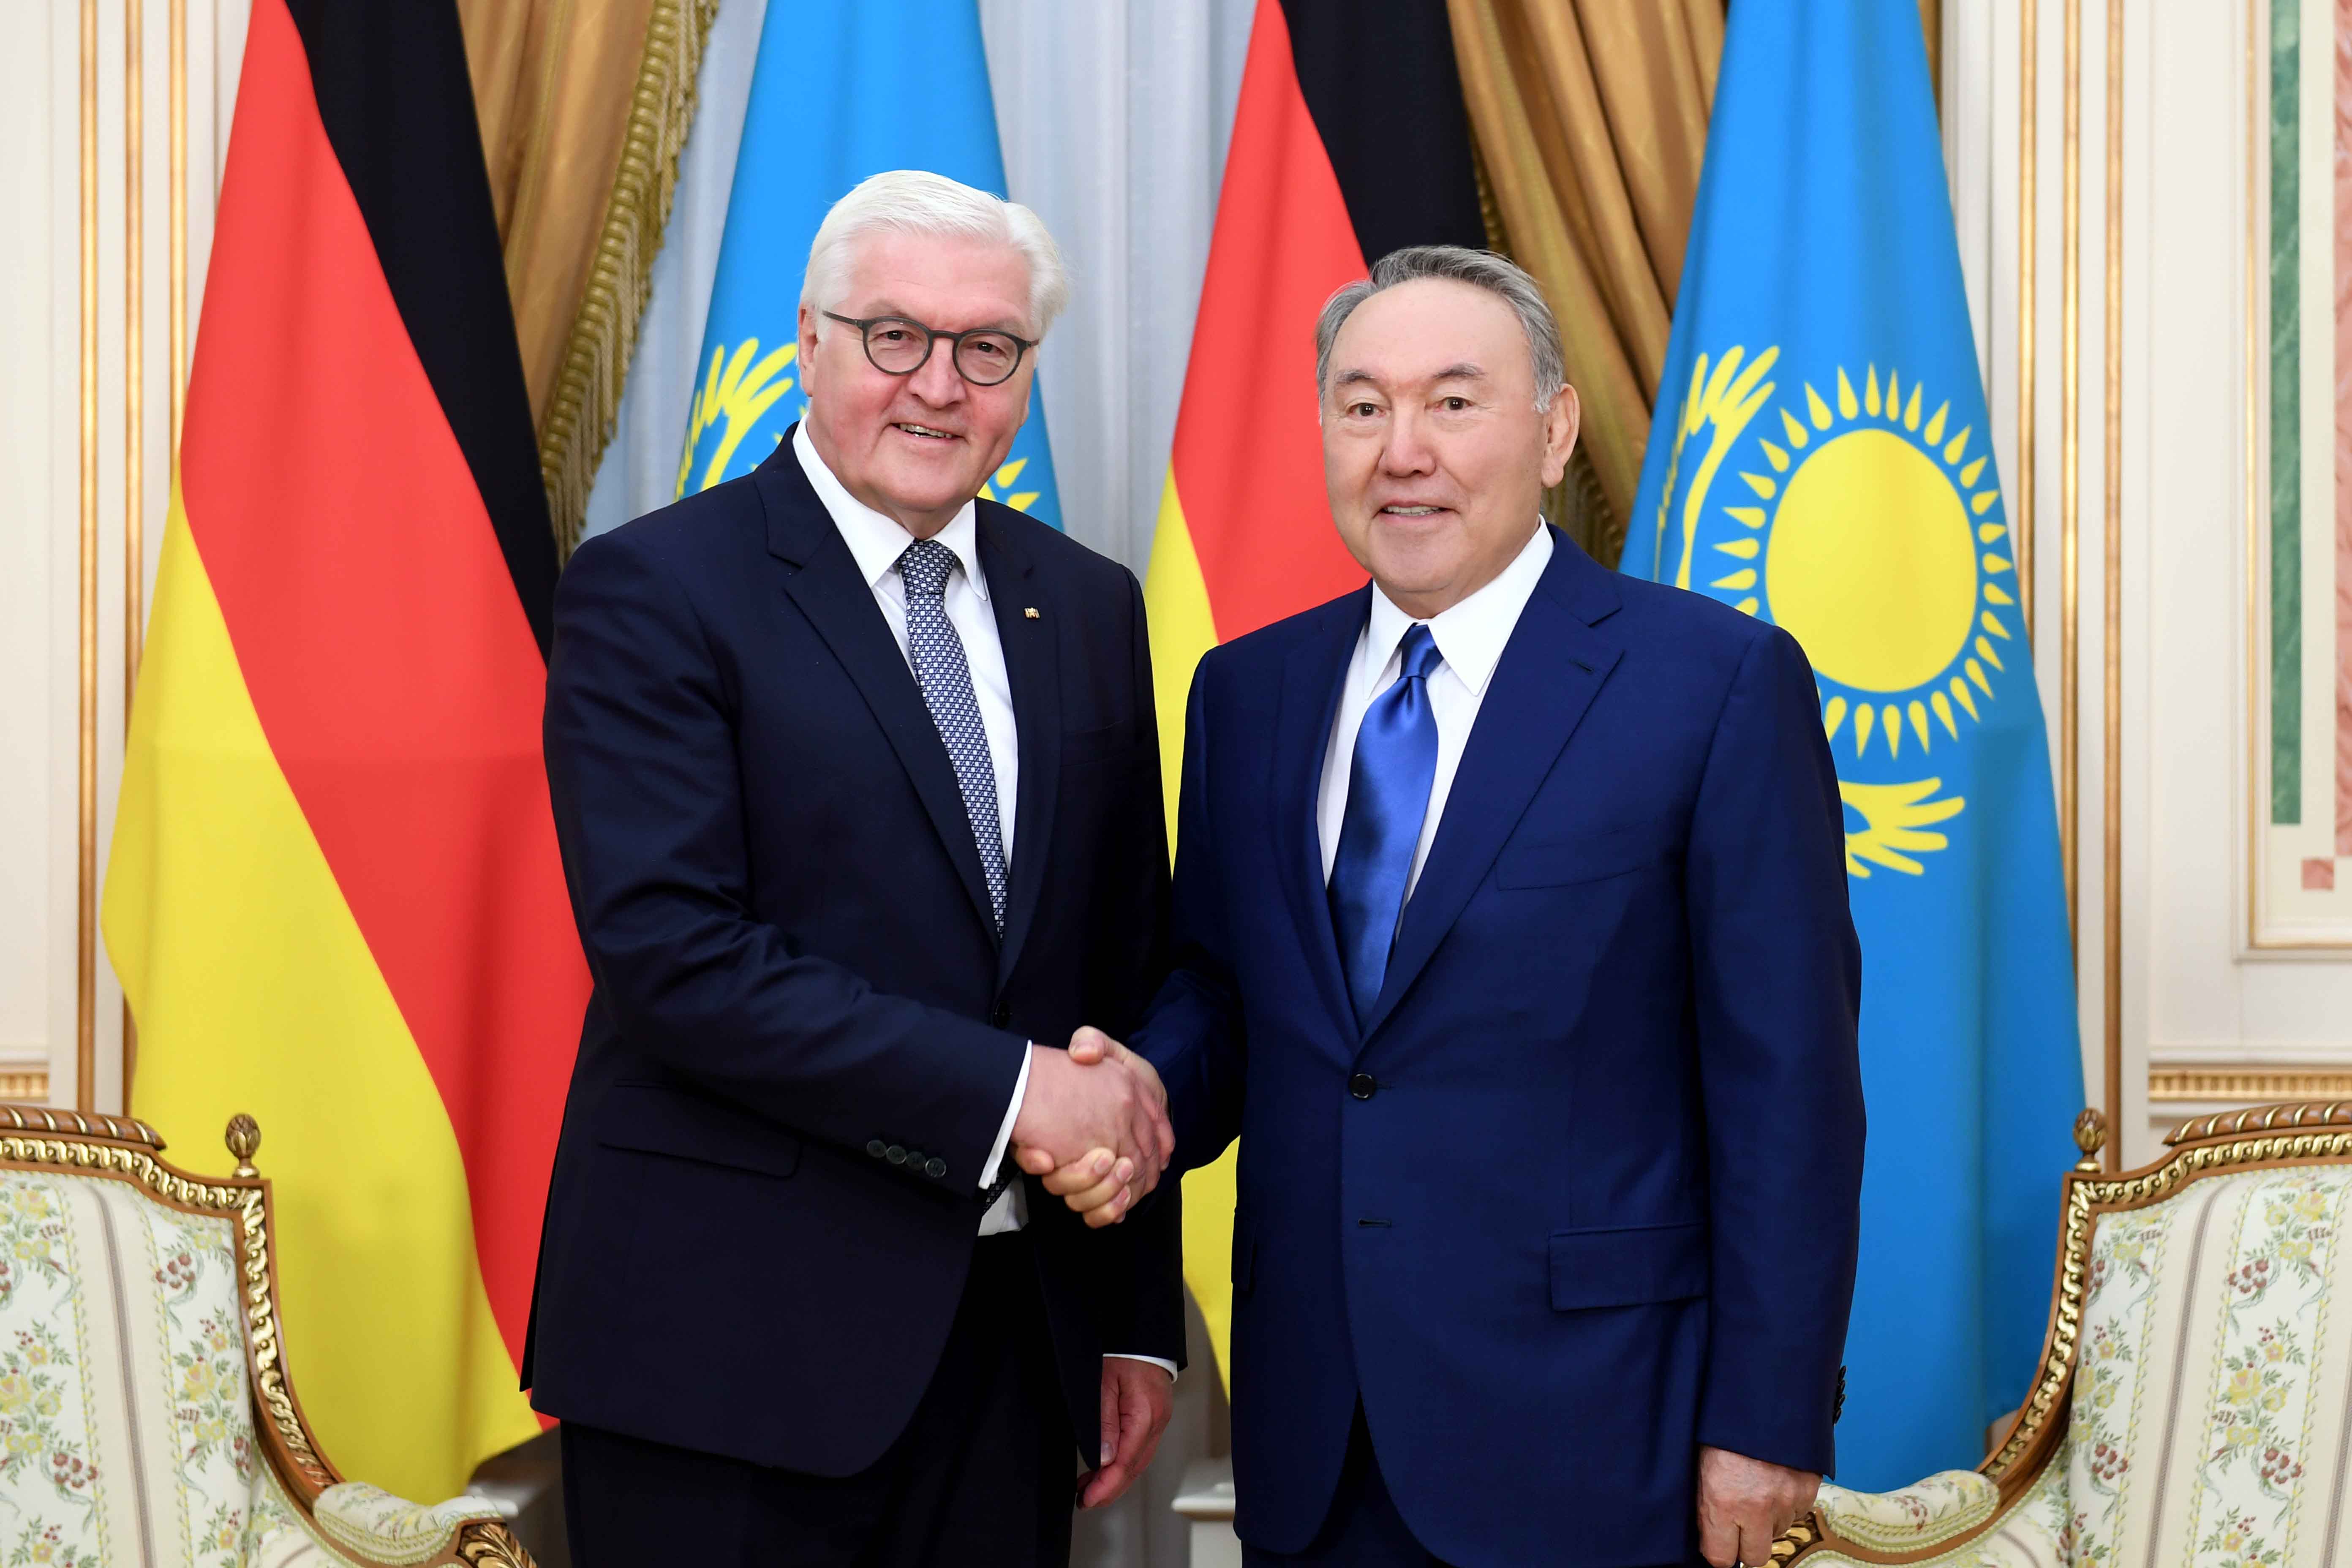 German President makes first visit to Astana, meets with Kazakh President